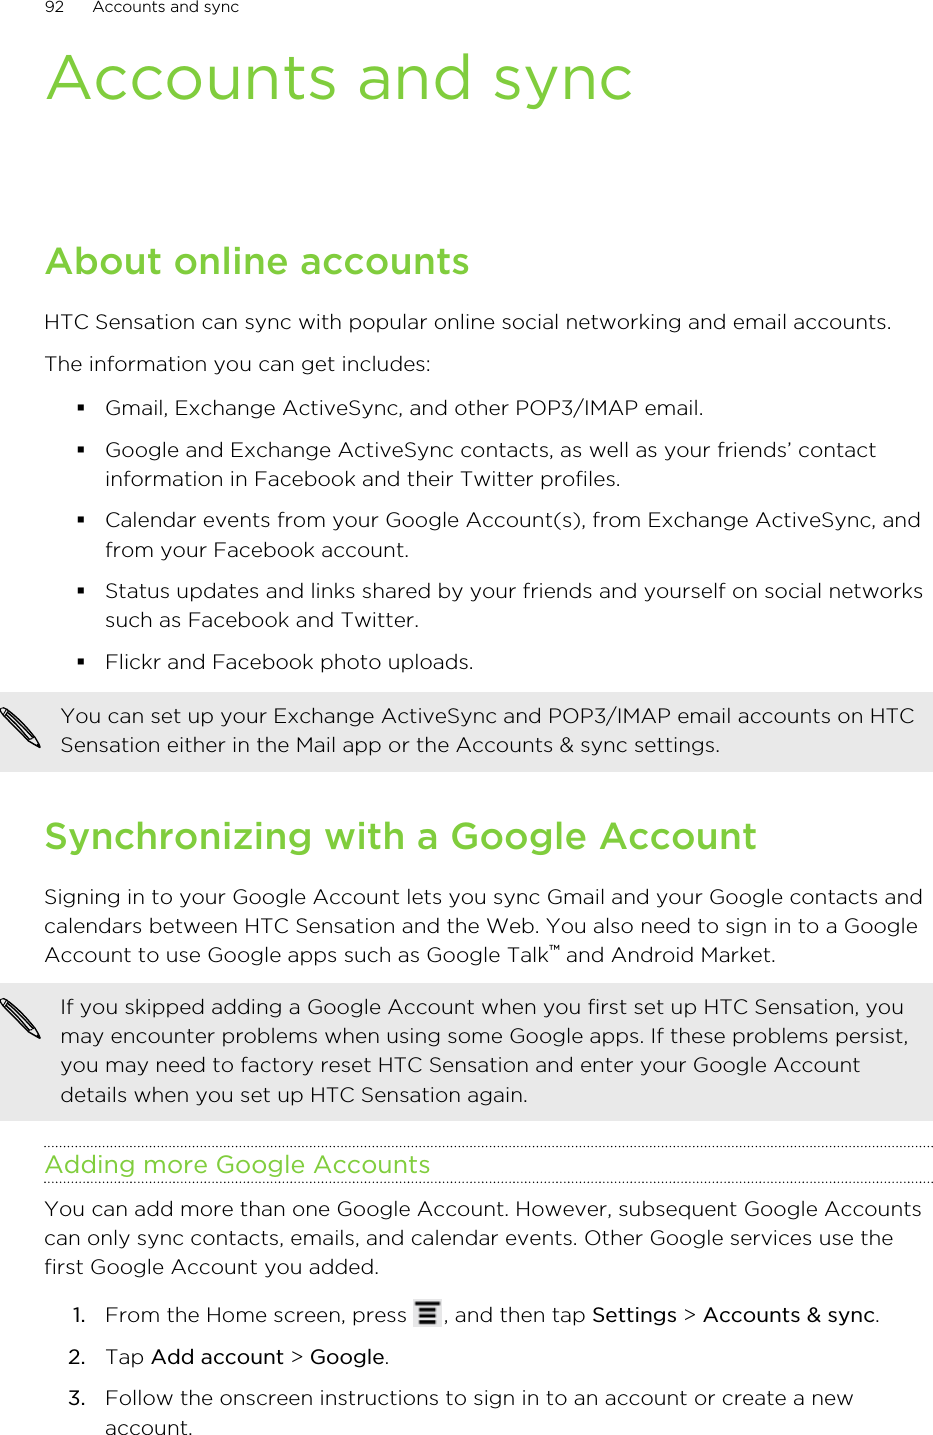 Accounts and syncAbout online accountsHTC Sensation can sync with popular online social networking and email accounts.The information you can get includes:§Gmail, Exchange ActiveSync, and other POP3/IMAP email.§Google and Exchange ActiveSync contacts, as well as your friends’ contactinformation in Facebook and their Twitter profiles.§Calendar events from your Google Account(s), from Exchange ActiveSync, andfrom your Facebook account.§Status updates and links shared by your friends and yourself on social networkssuch as Facebook and Twitter.§Flickr and Facebook photo uploads.You can set up your Exchange ActiveSync and POP3/IMAP email accounts on HTCSensation either in the Mail app or the Accounts &amp; sync settings.Synchronizing with a Google AccountSigning in to your Google Account lets you sync Gmail and your Google contacts andcalendars between HTC Sensation and the Web. You also need to sign in to a GoogleAccount to use Google apps such as Google Talk™ and Android Market.If you skipped adding a Google Account when you first set up HTC Sensation, youmay encounter problems when using some Google apps. If these problems persist,you may need to factory reset HTC Sensation and enter your Google Accountdetails when you set up HTC Sensation again.Adding more Google AccountsYou can add more than one Google Account. However, subsequent Google Accountscan only sync contacts, emails, and calendar events. Other Google services use thefirst Google Account you added.1. From the Home screen, press  , and then tap Settings &gt; Accounts &amp; sync.2. Tap Add account &gt; Google.3. Follow the onscreen instructions to sign in to an account or create a newaccount.92 Accounts and sync